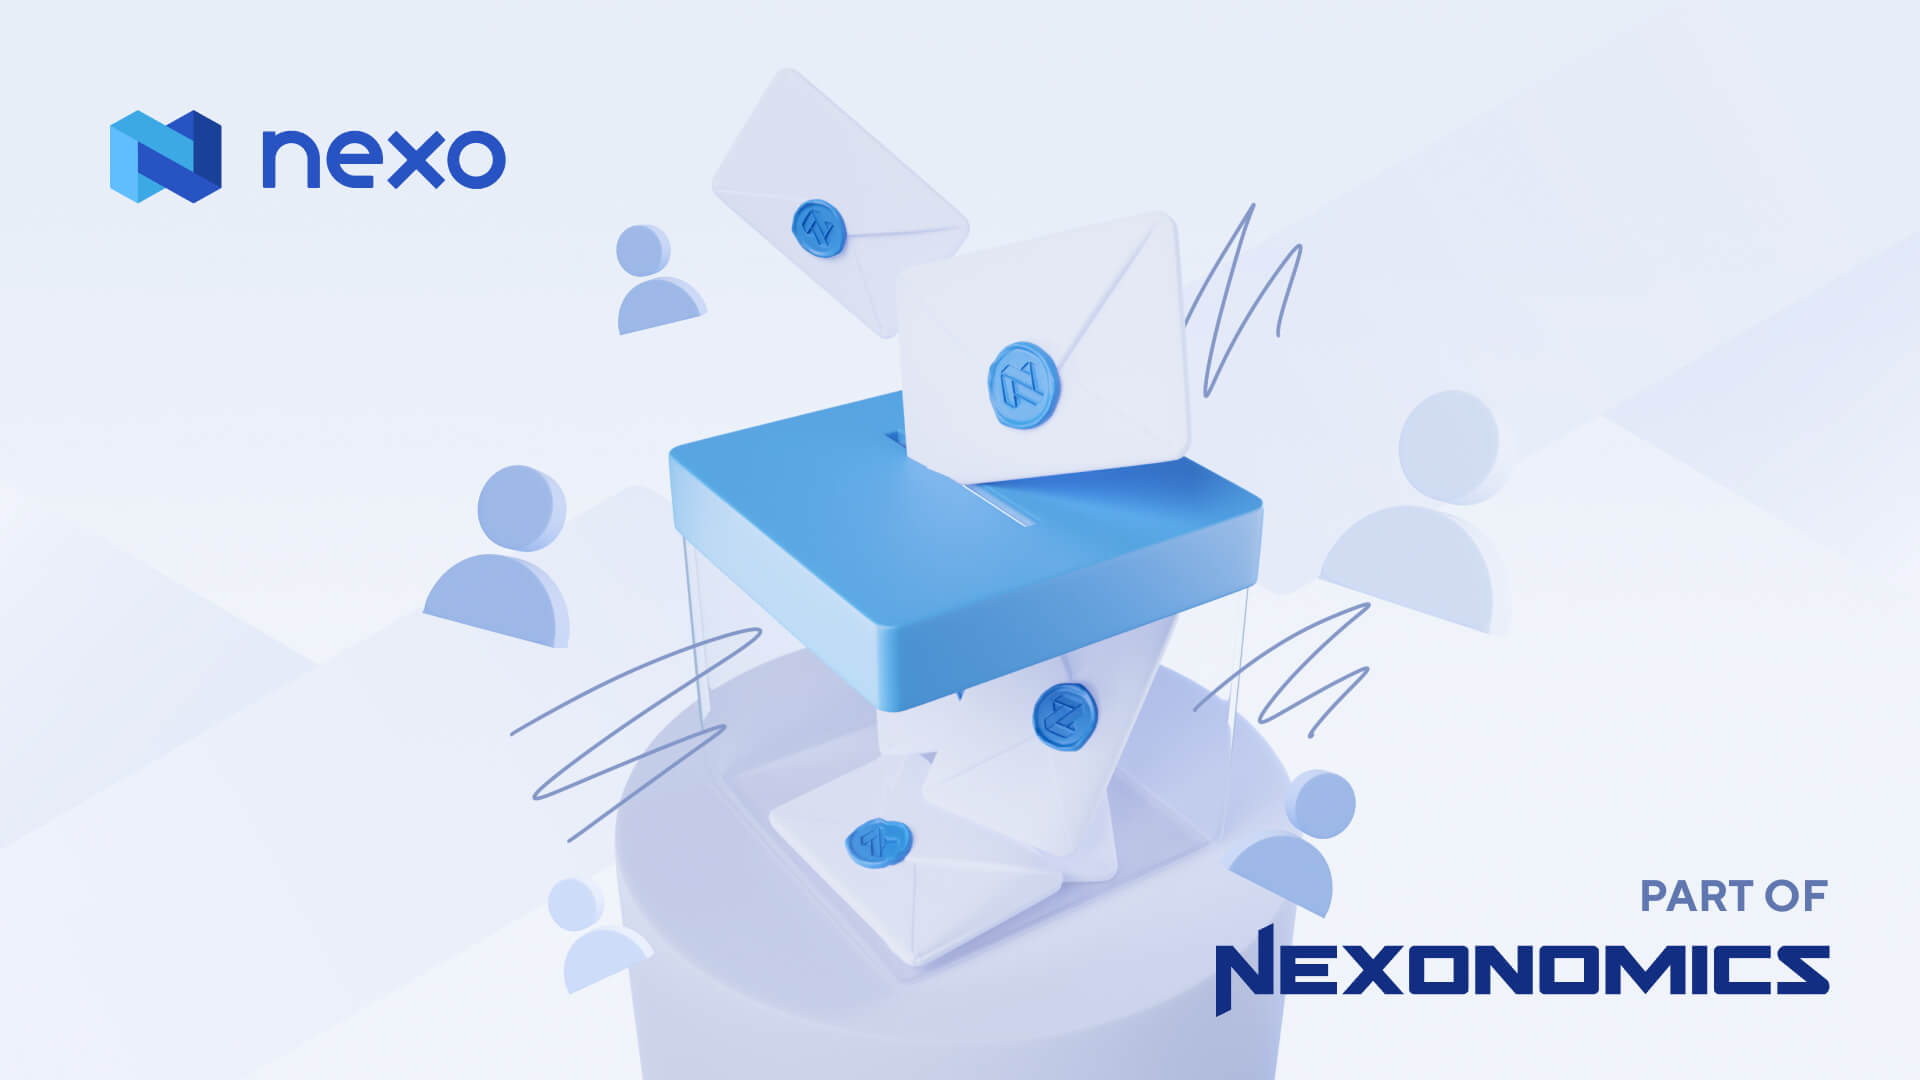 You Asked, We Answered: The Daily Interest on NEXO Tokens Proposal